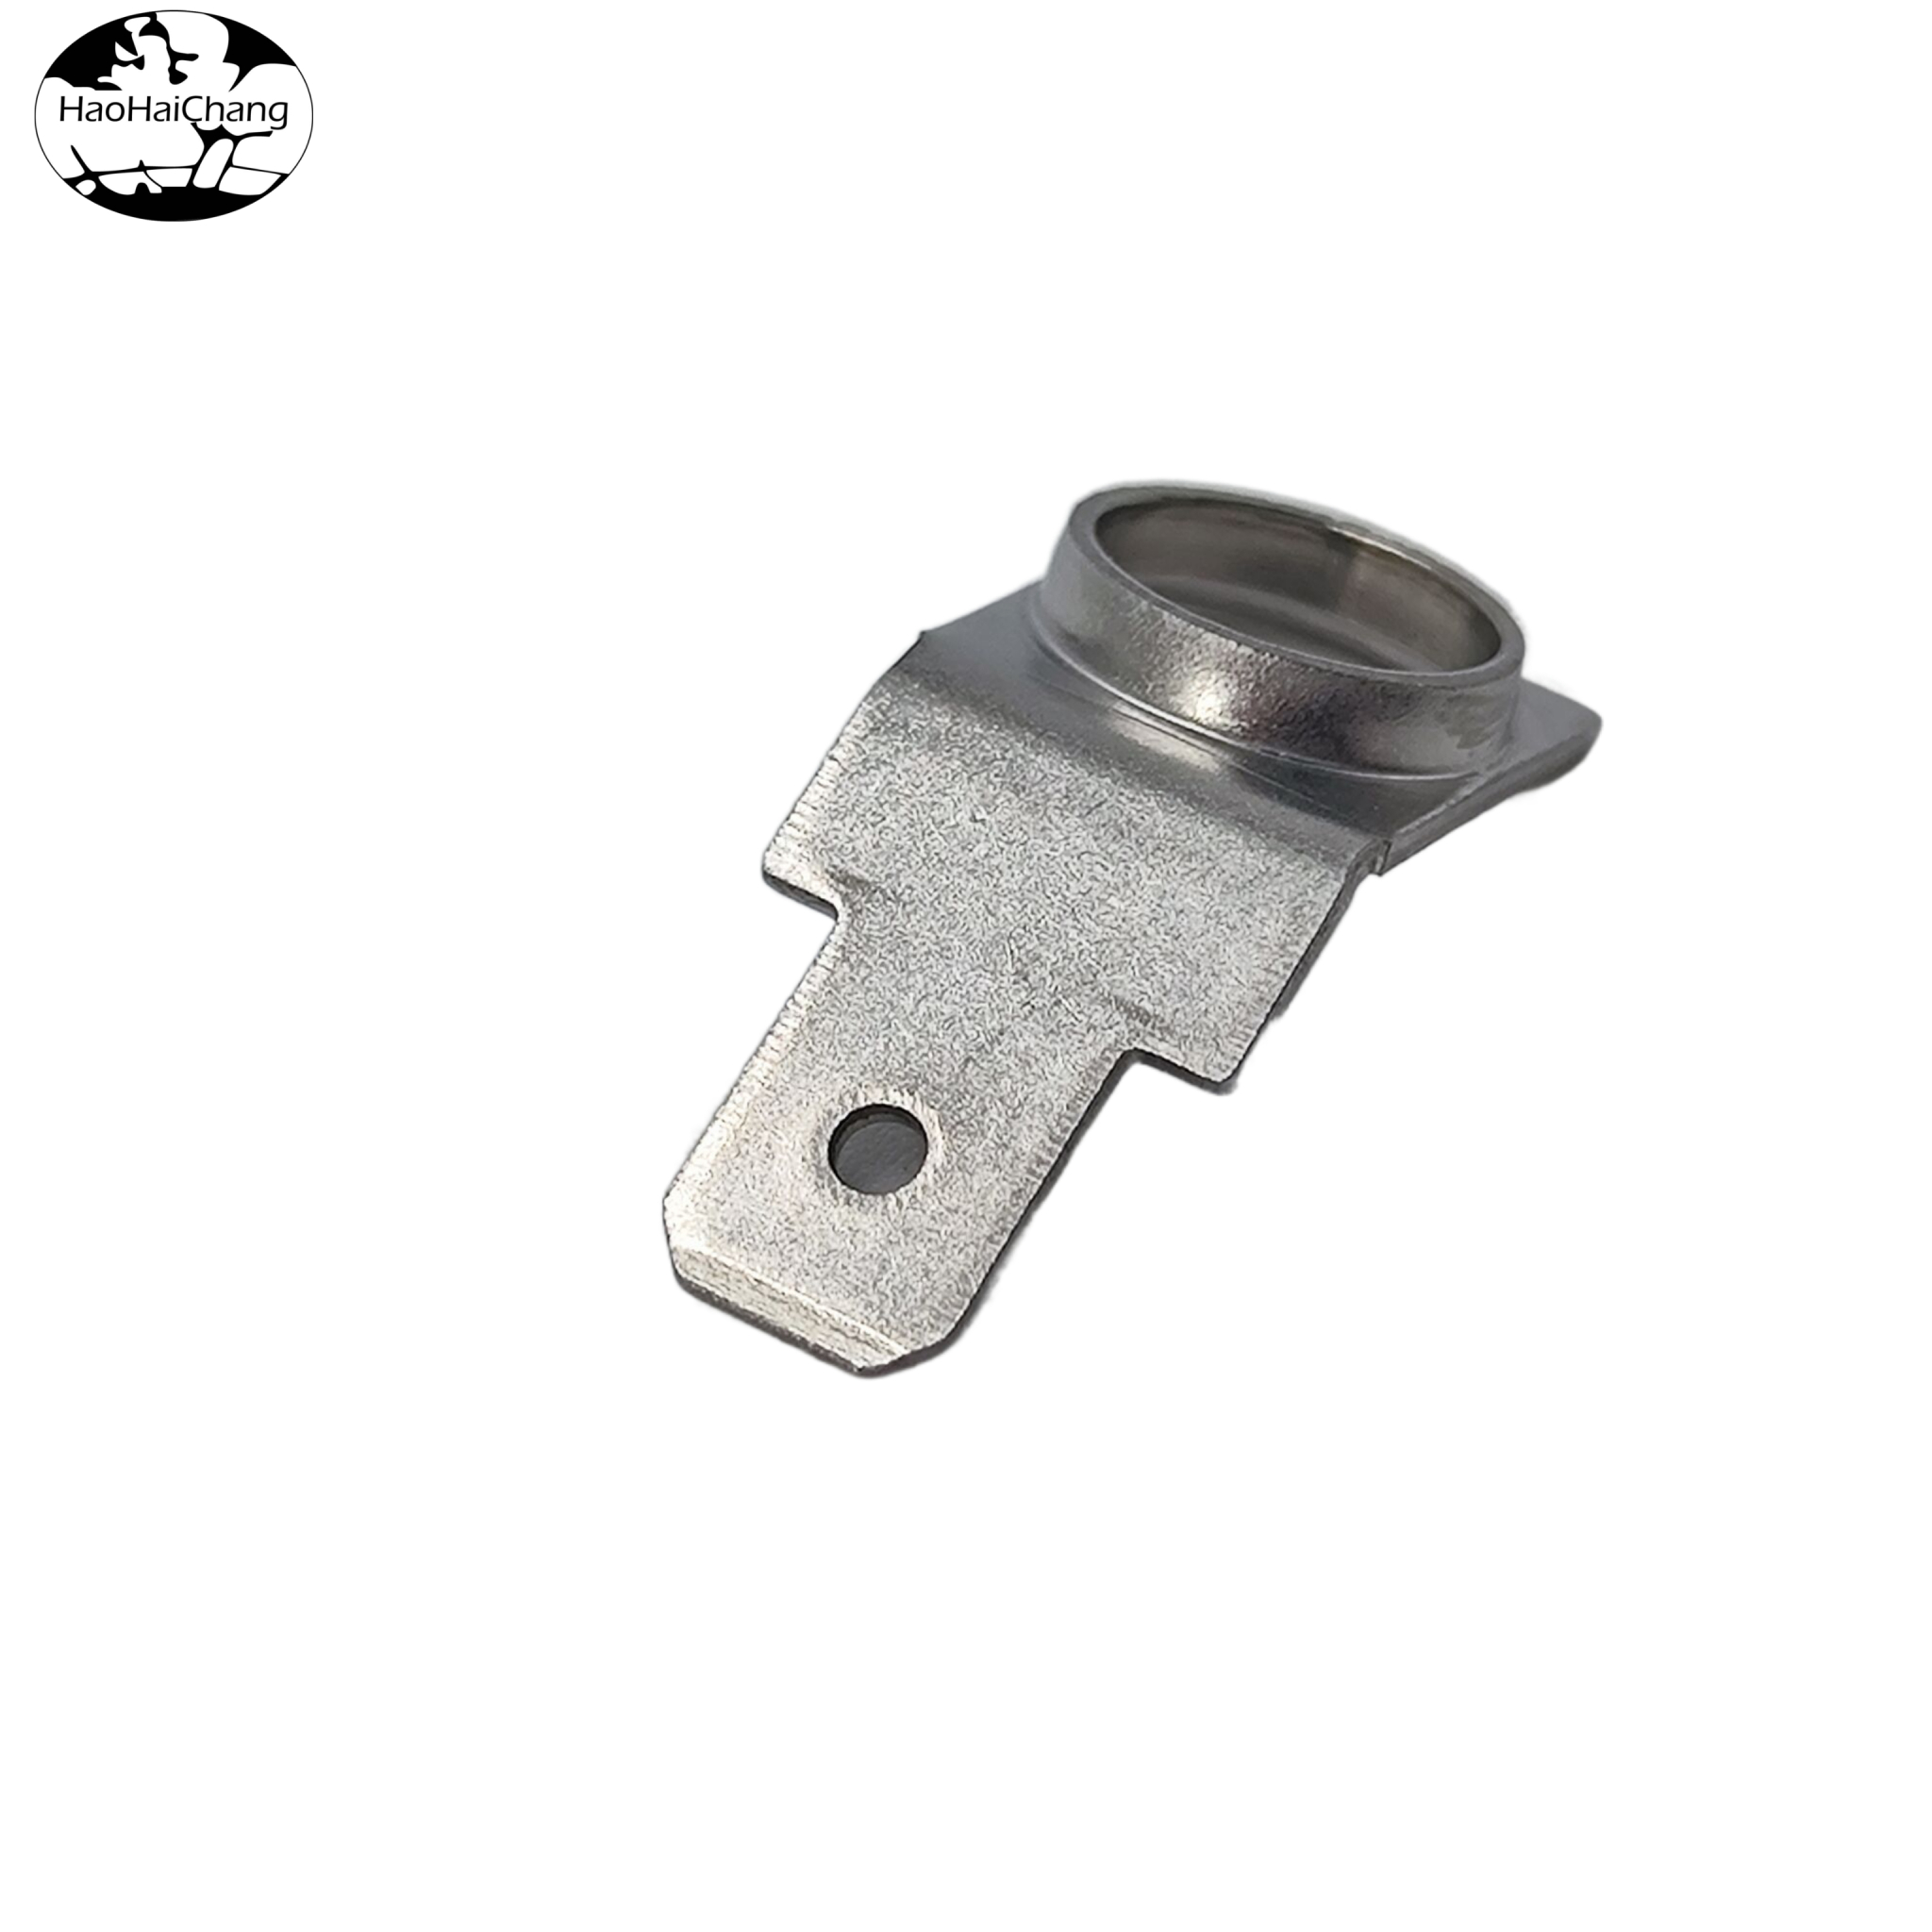 HHC-0309 Connector